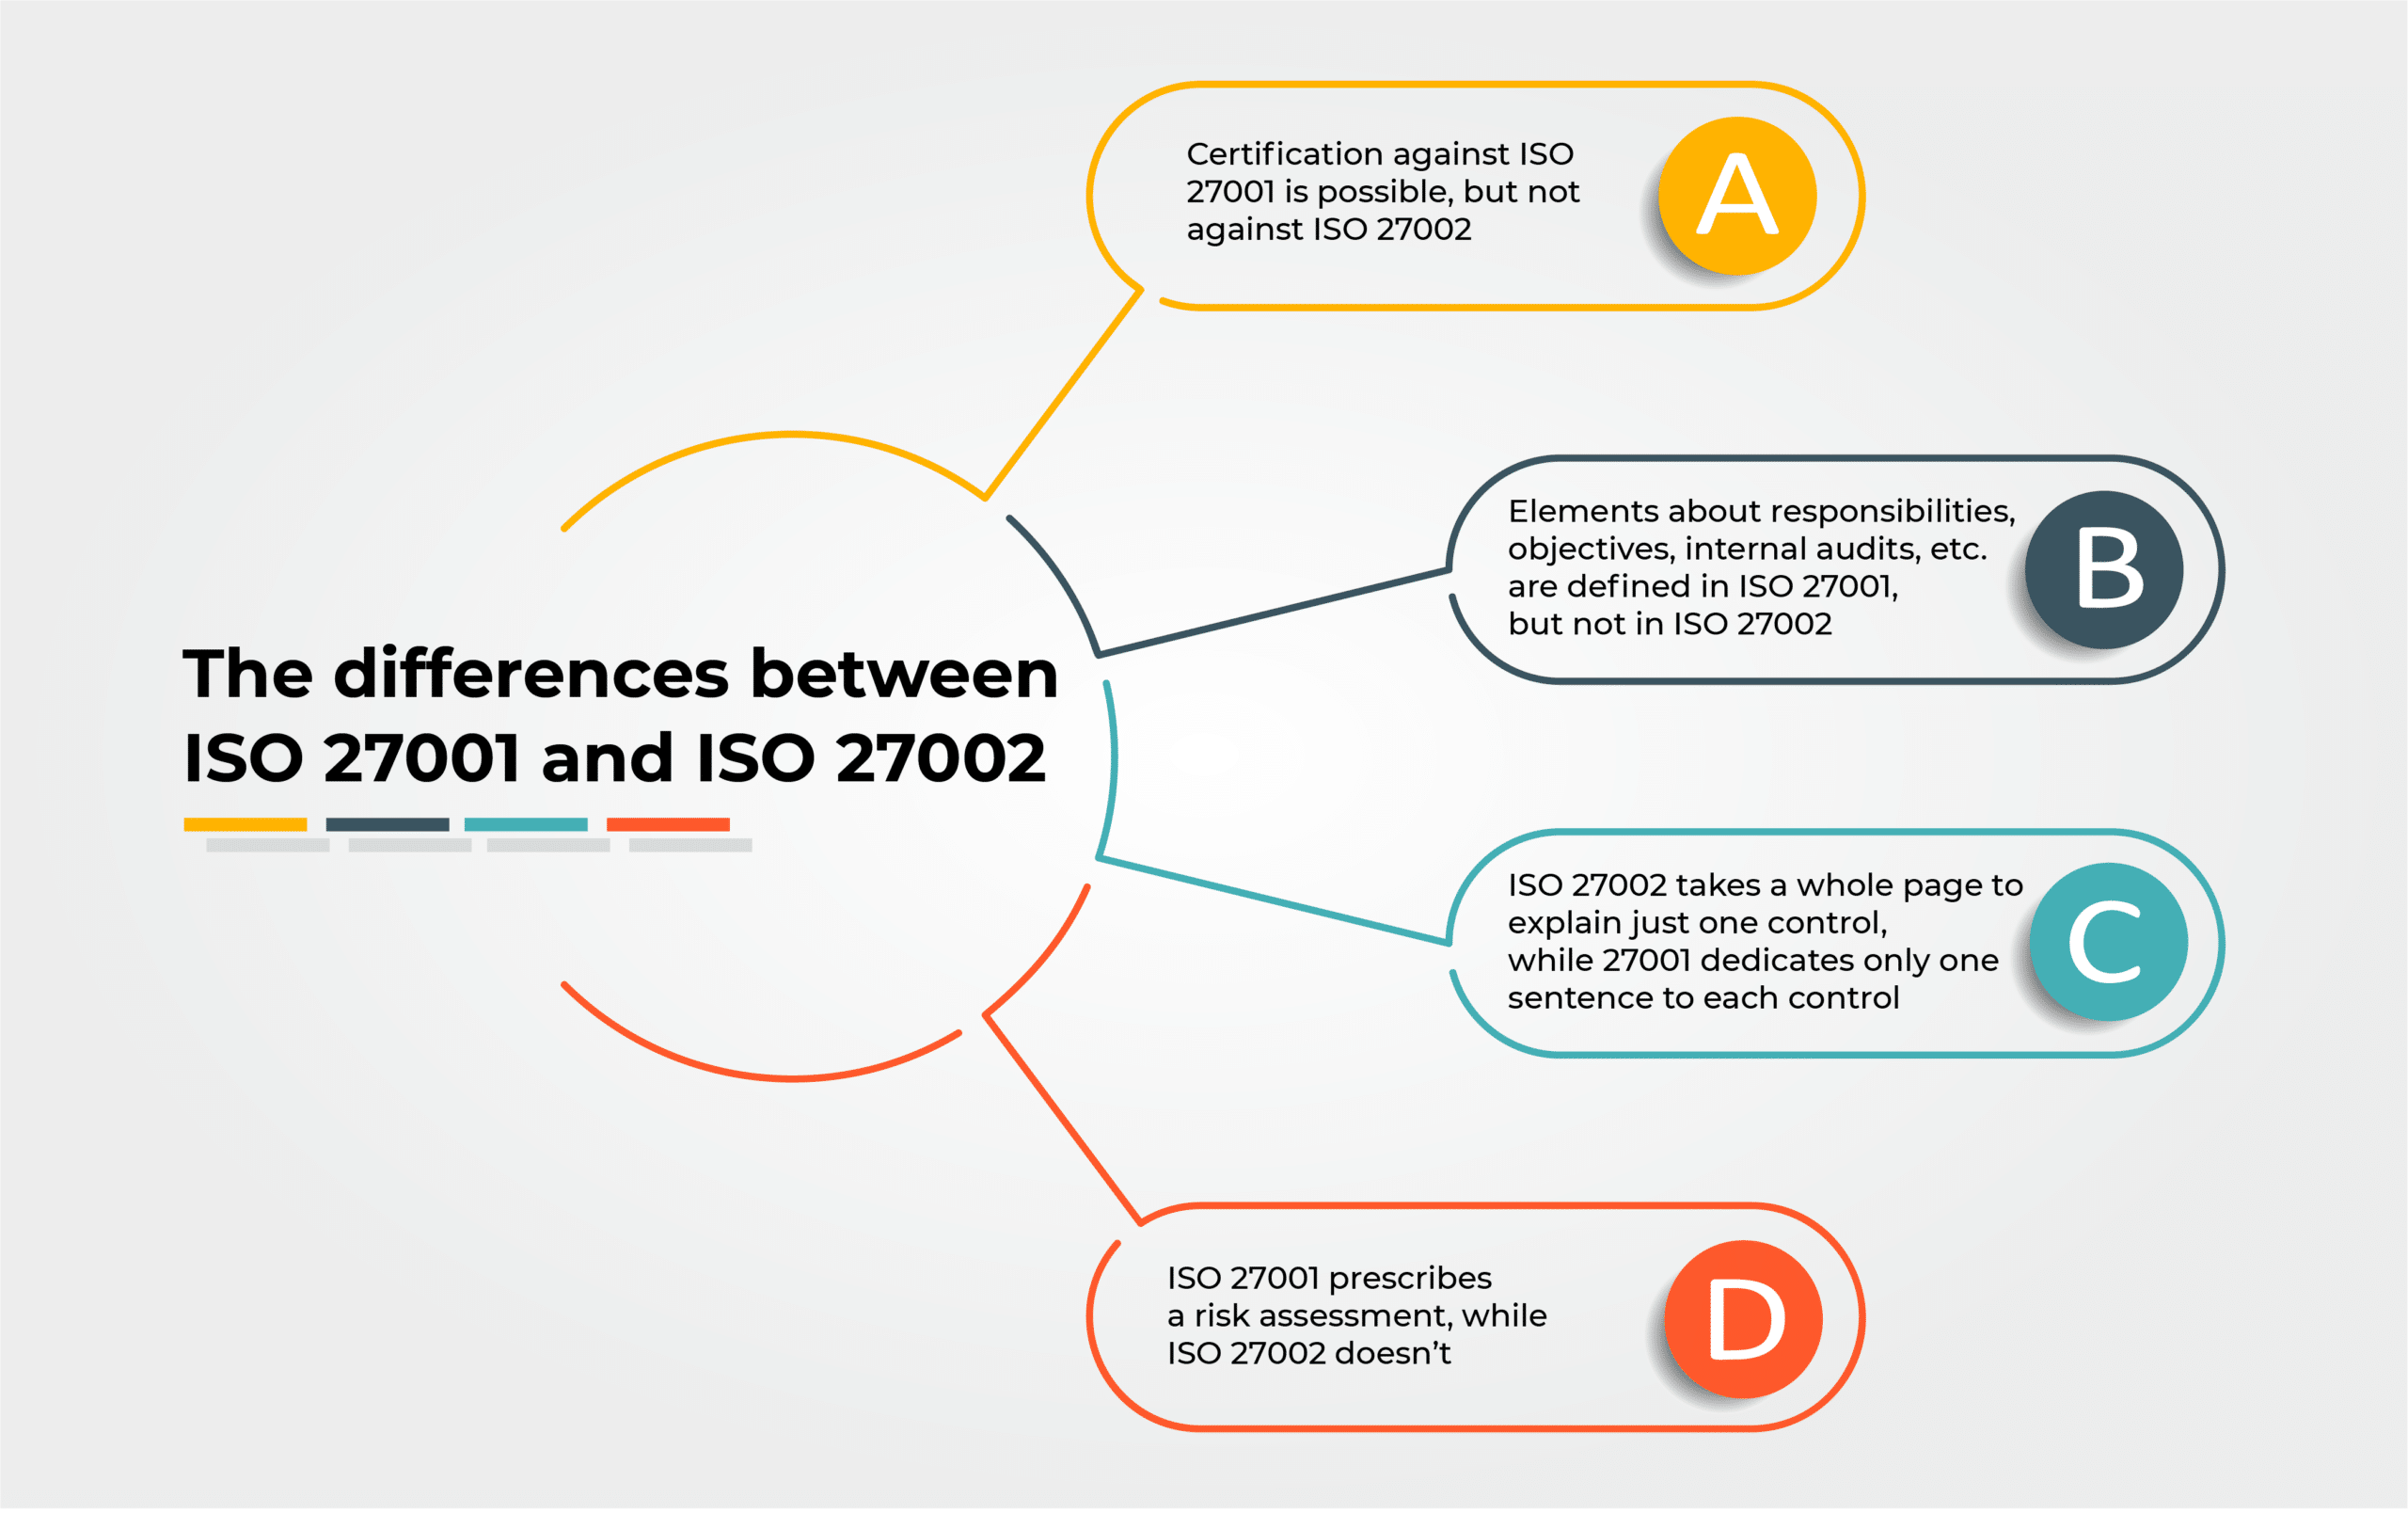 The differences between ISO 27001 and ISO 27002